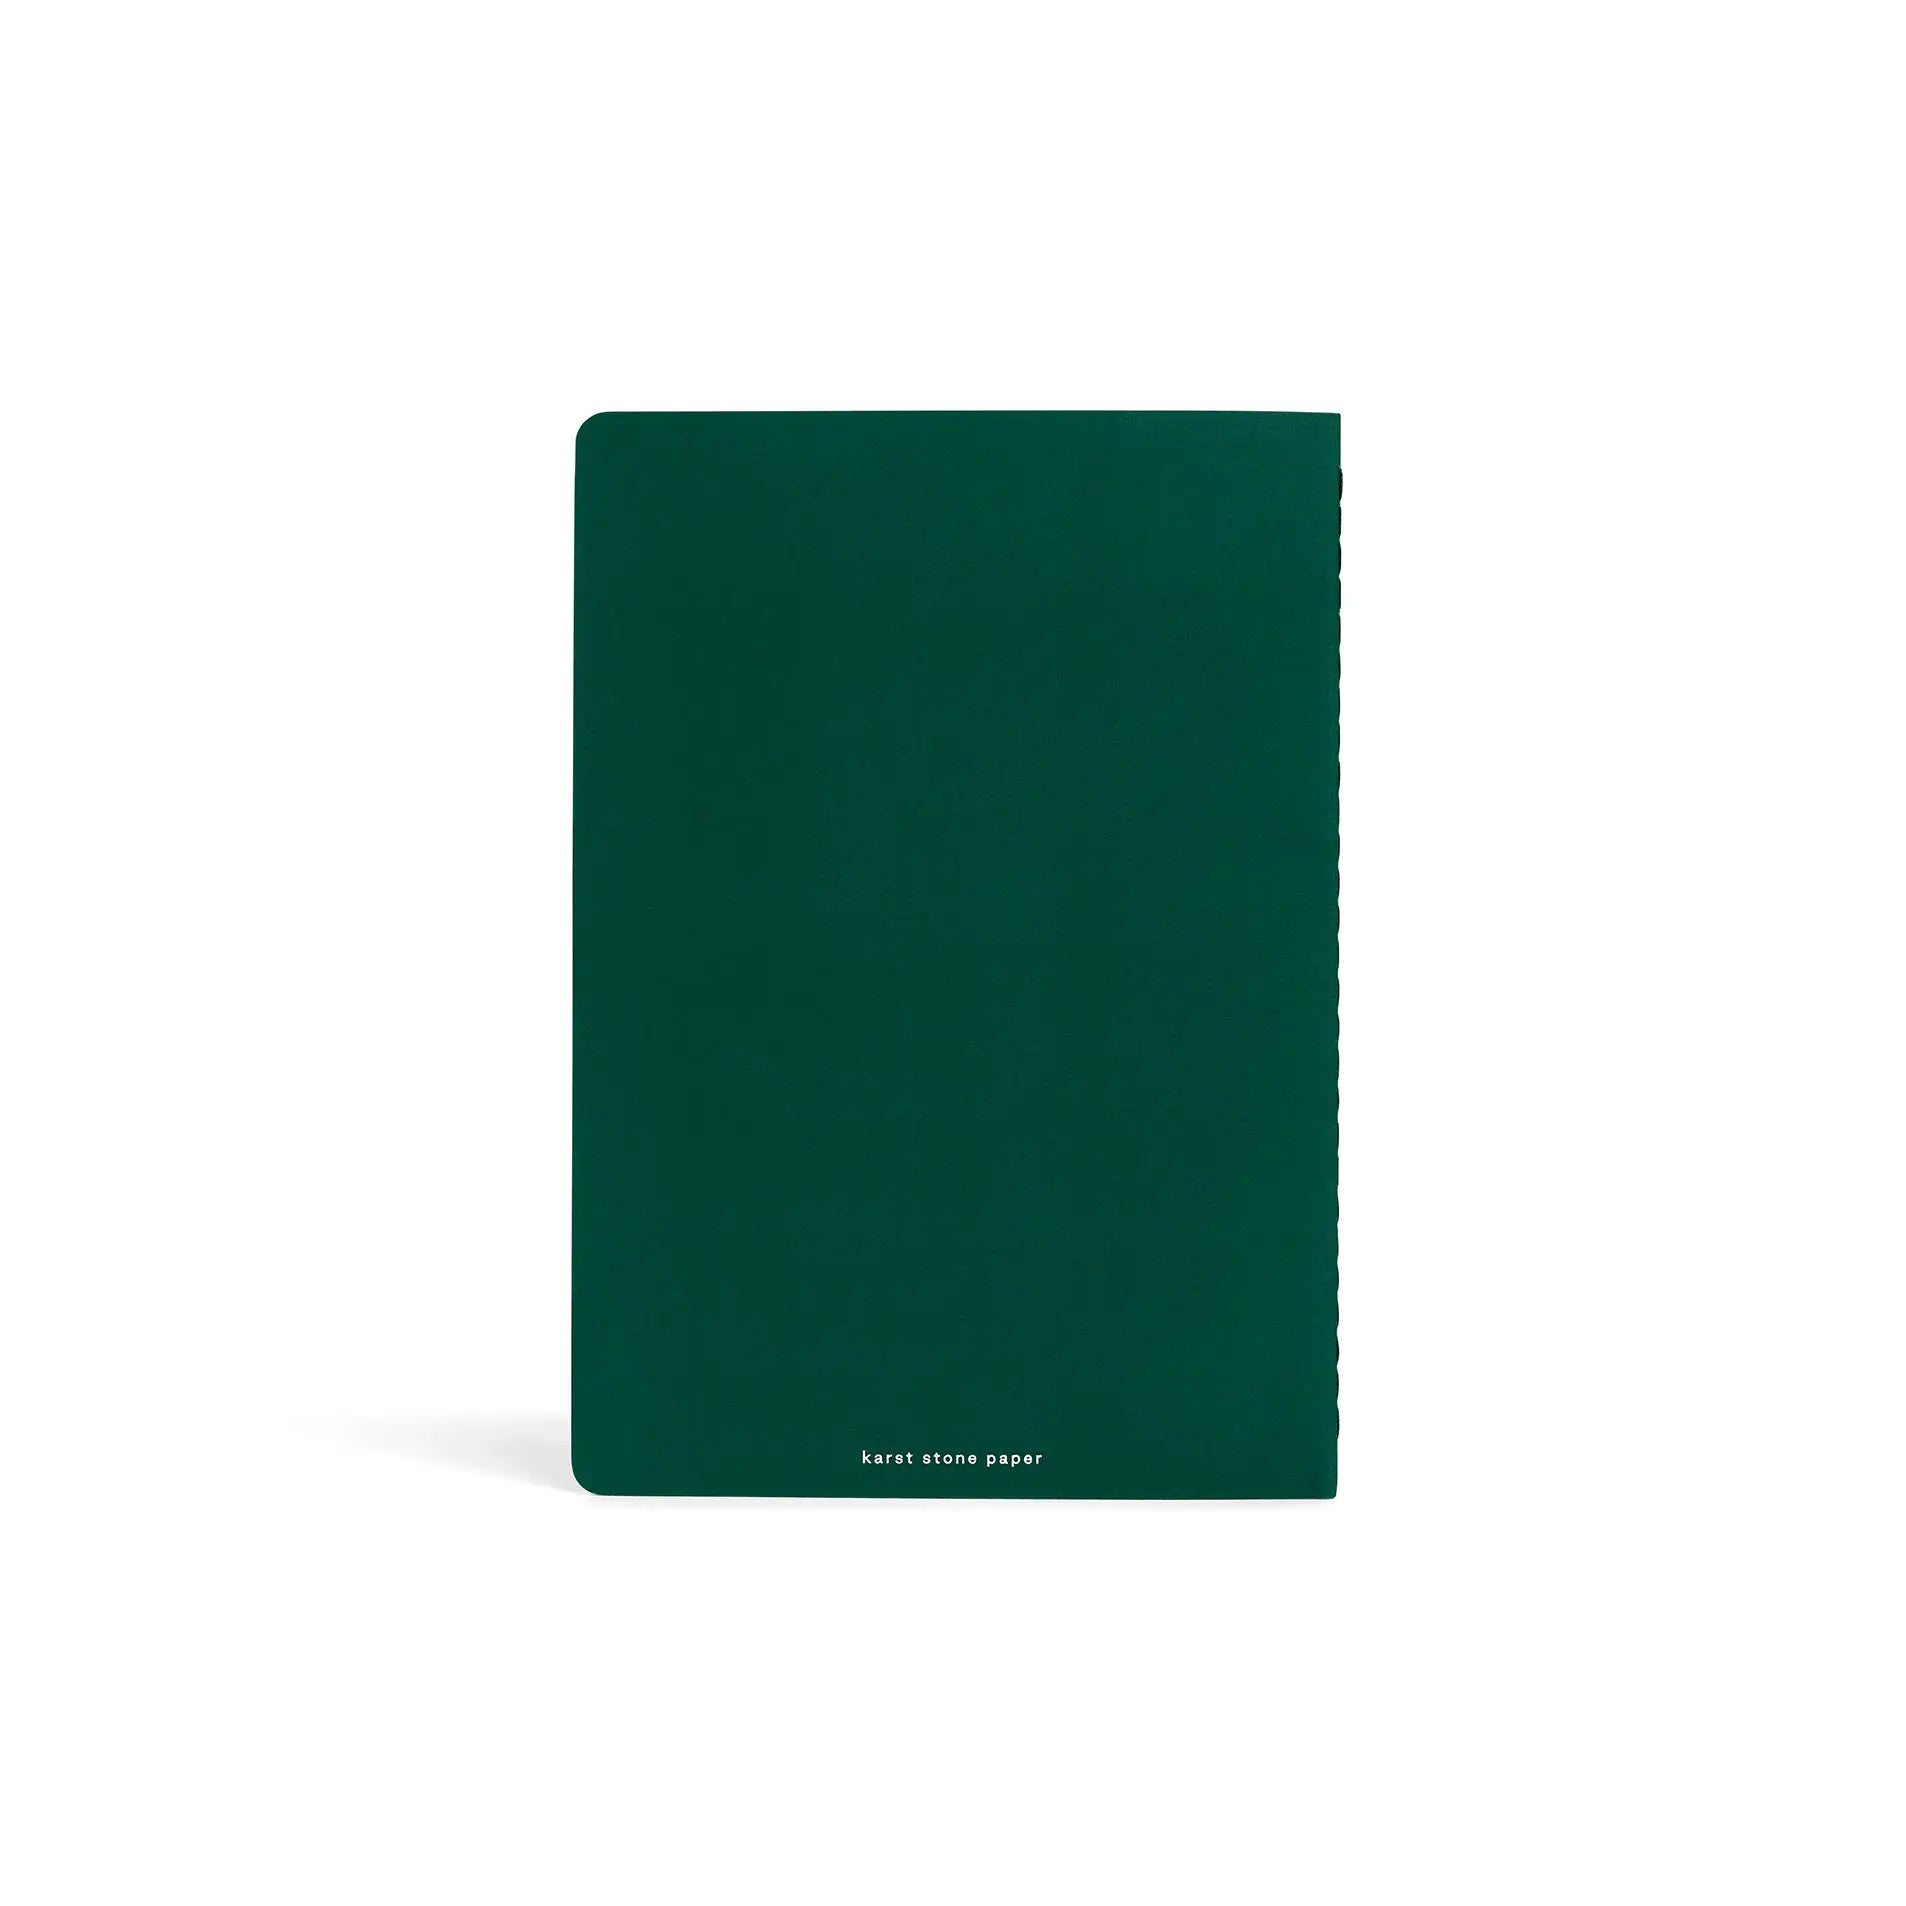 Karst stone paper journal A5 forest green twin pack achterkant zonder label